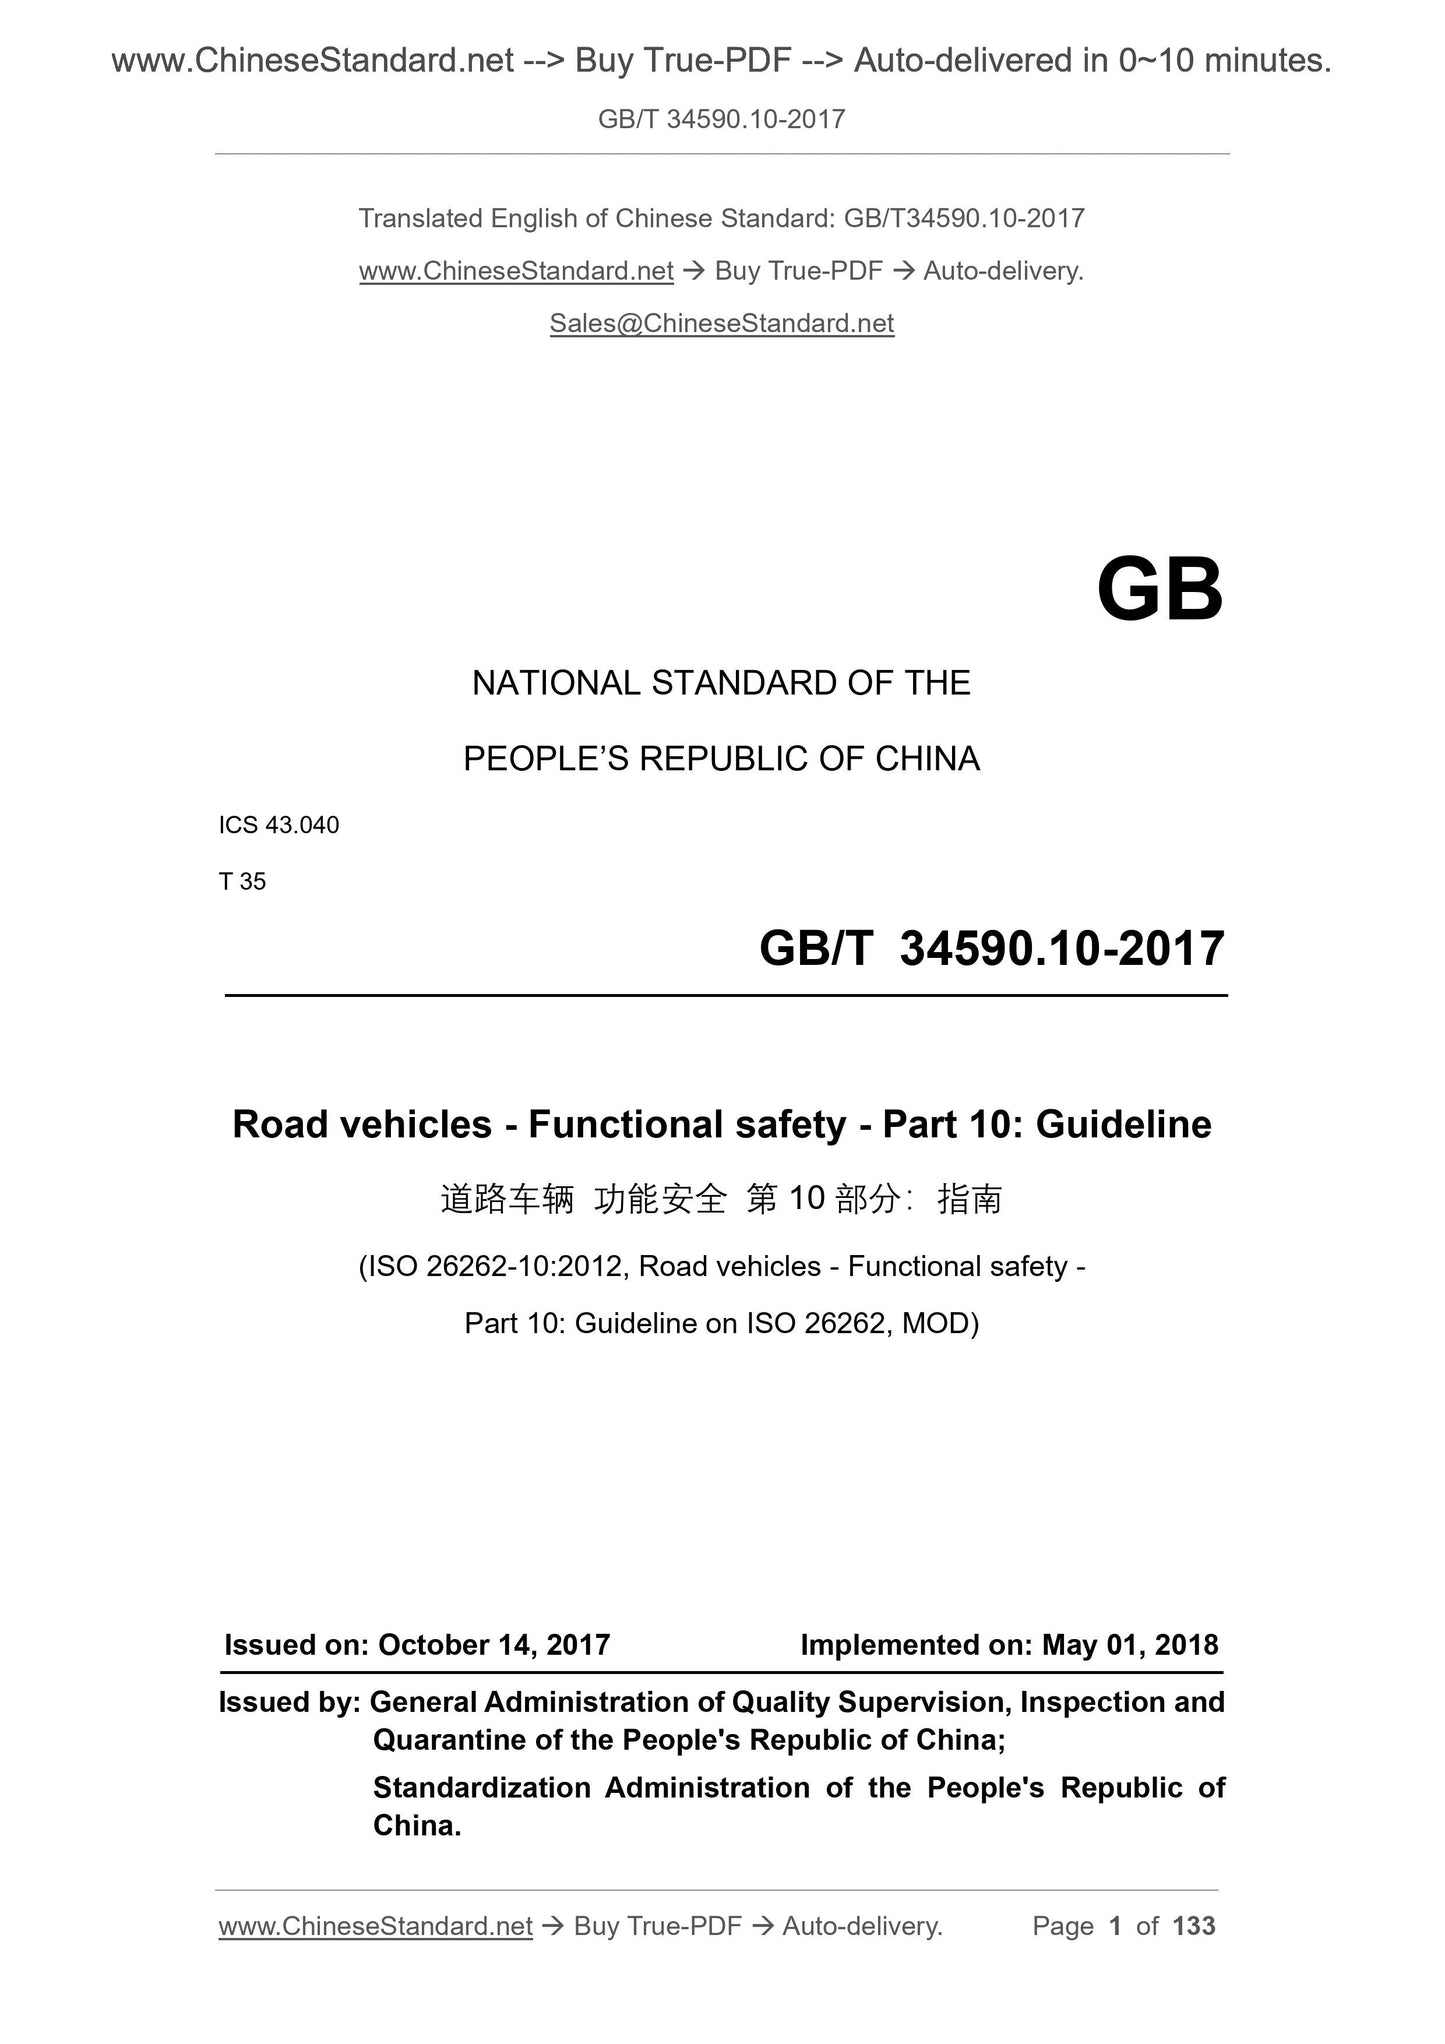 GB/T 34590.10-2017 Page 1